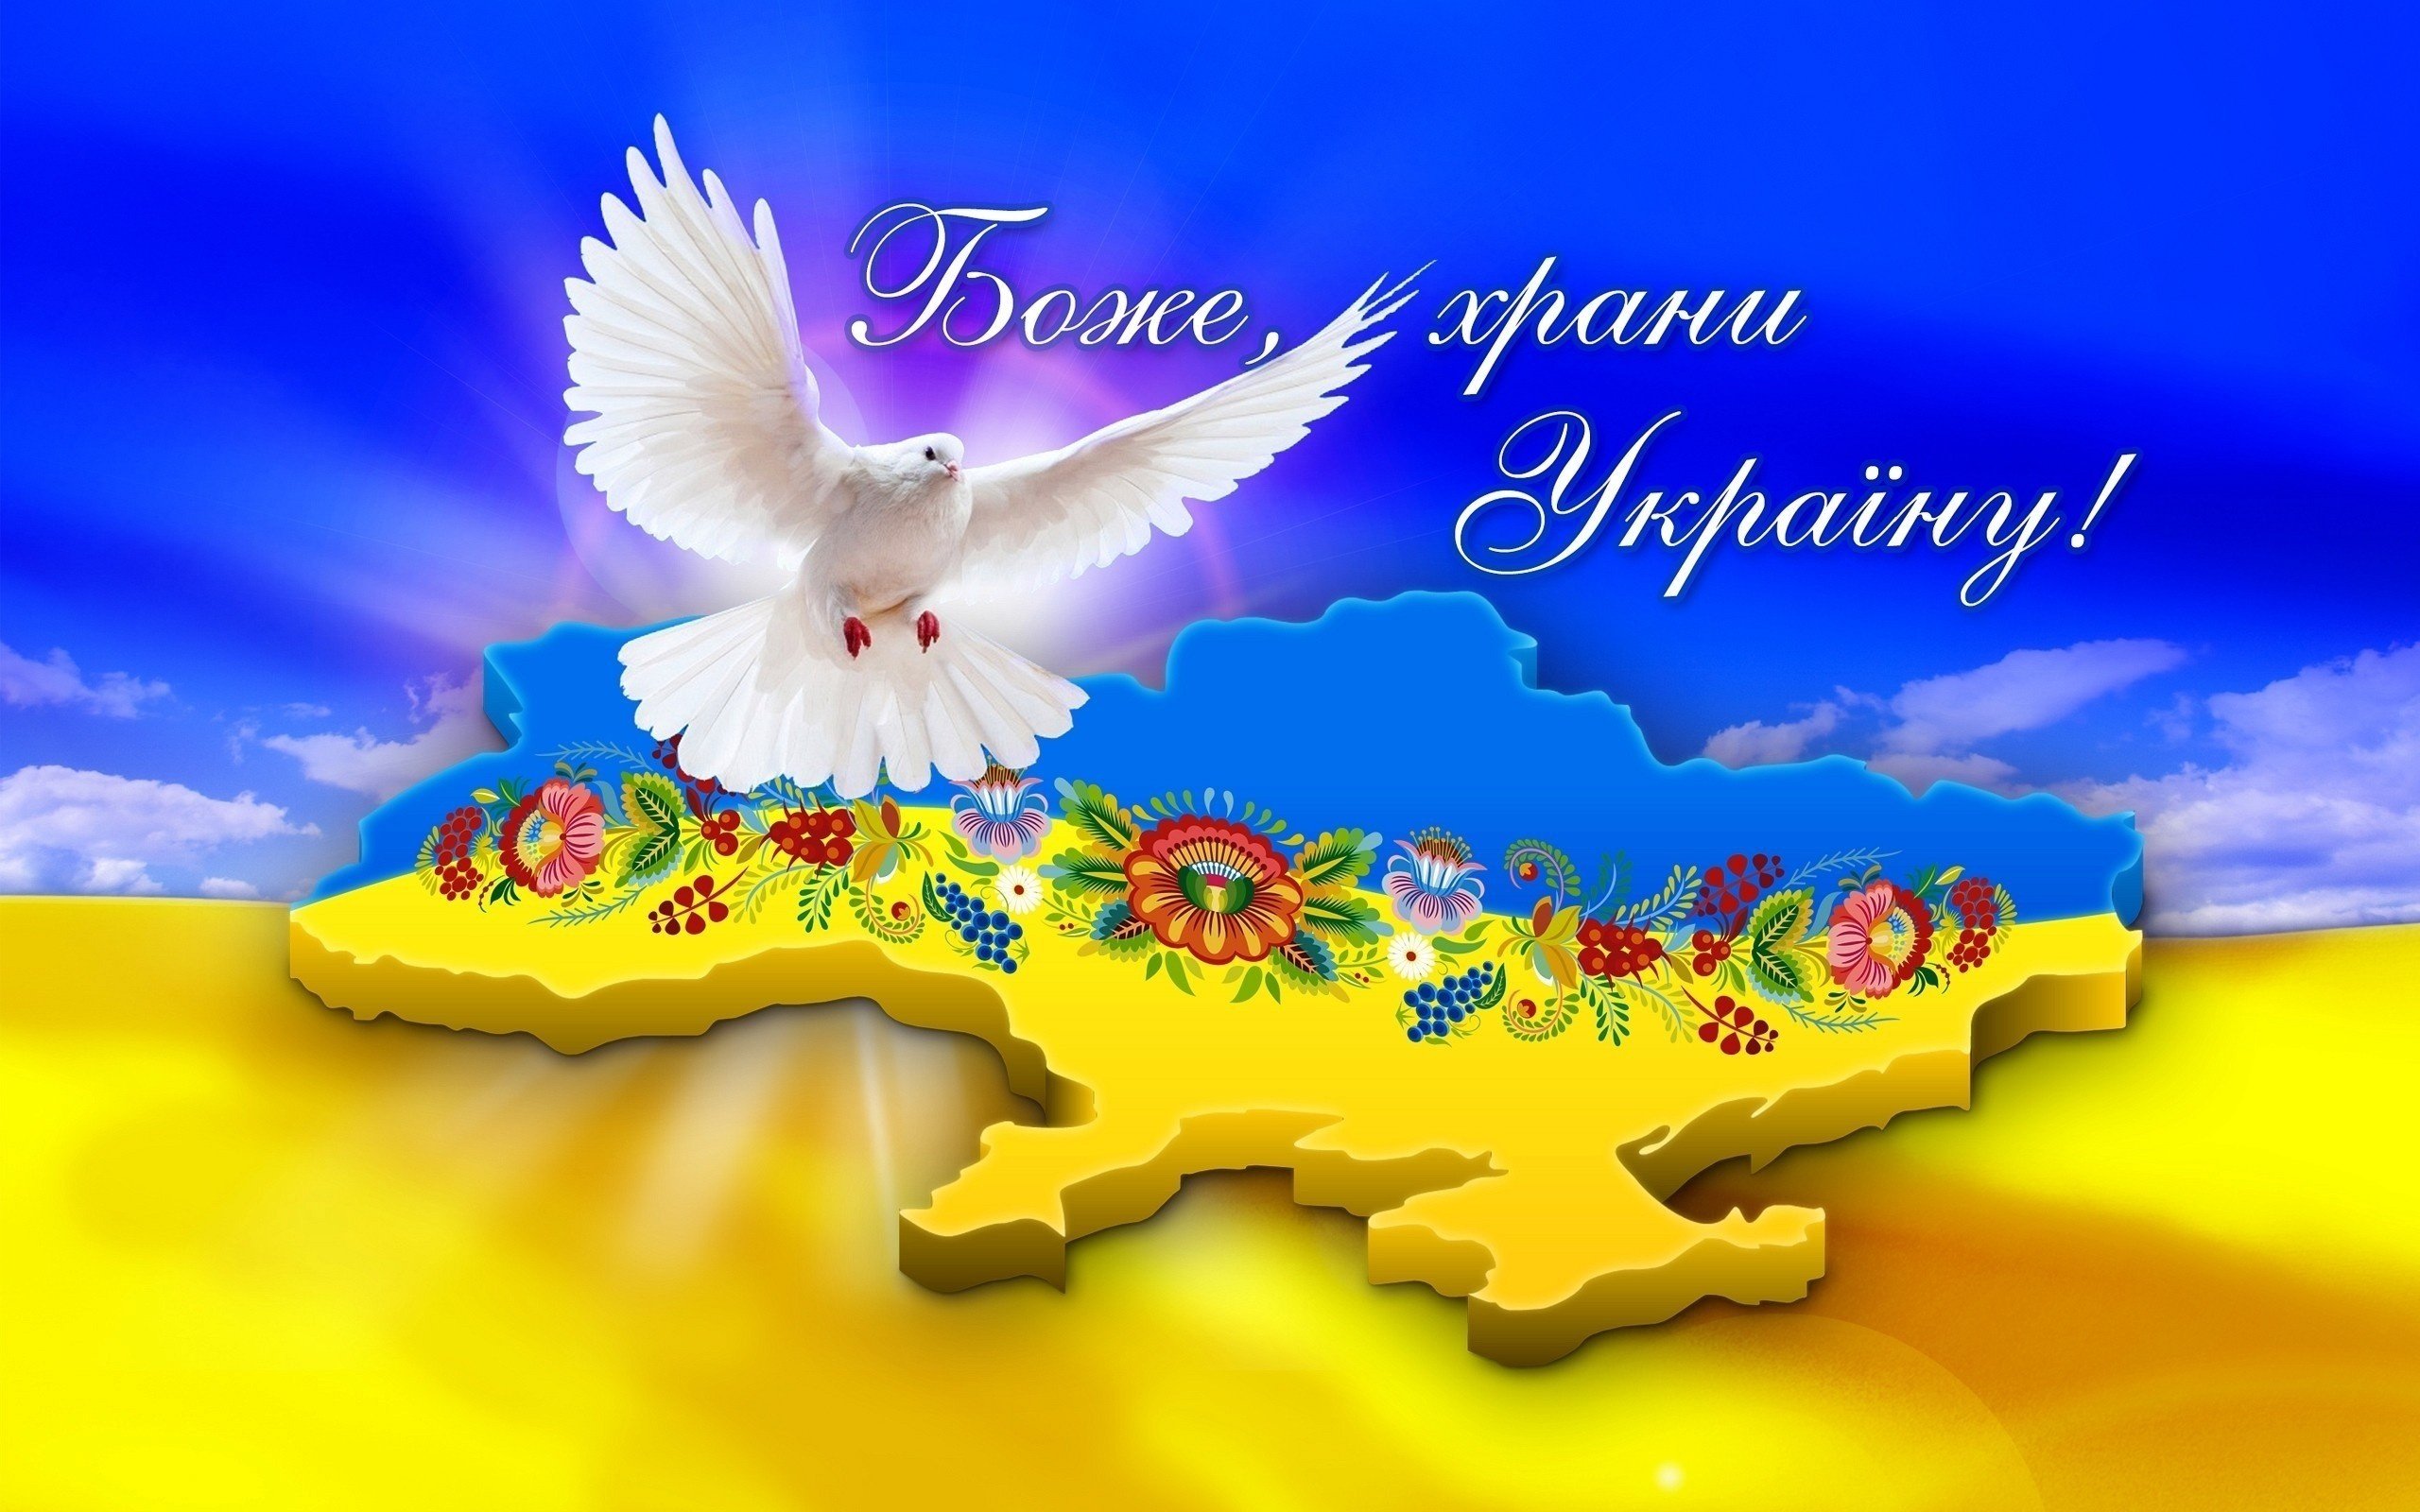 Ukraine A Country Patterns Lettering Words Dove Blue Yellow Wallpaper